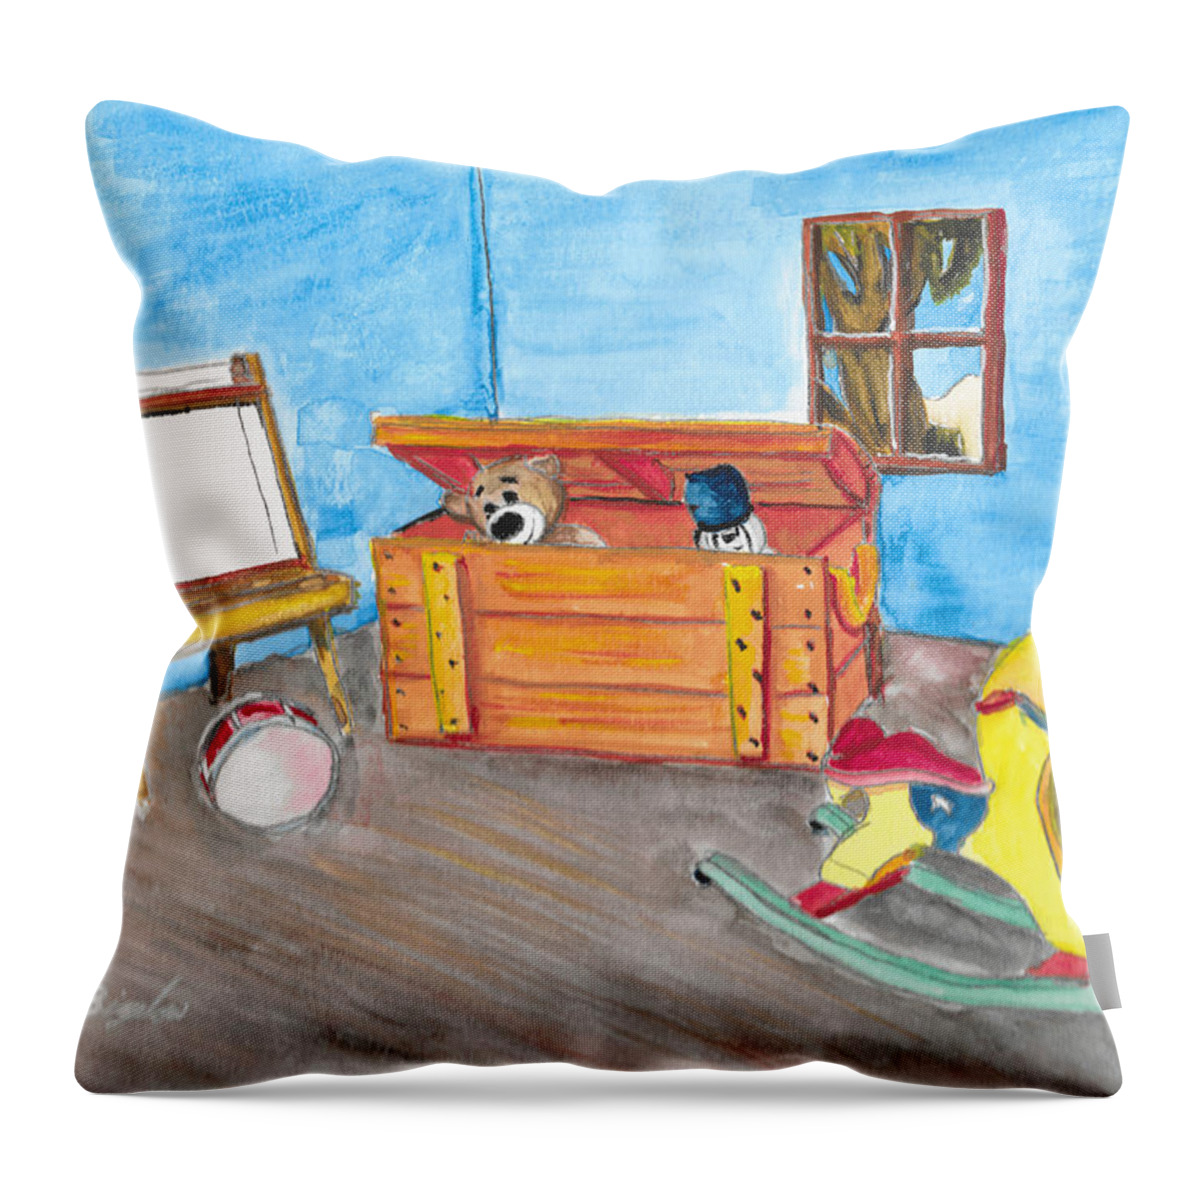 Toy Throw Pillow featuring the painting Your Toy Room by David Bigelow